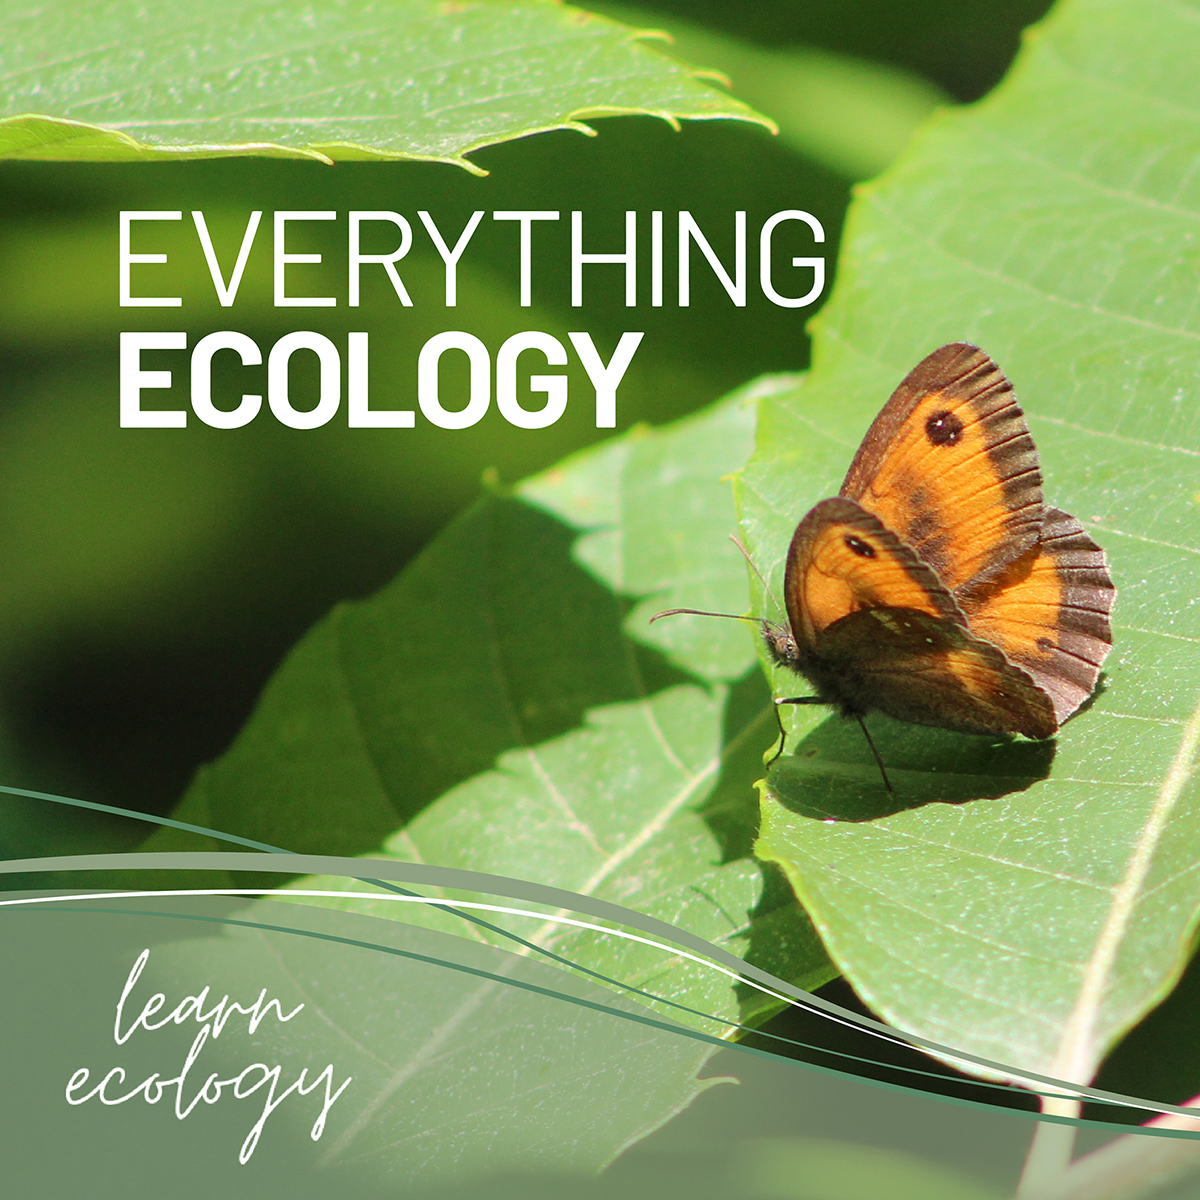 For all your ecological needs